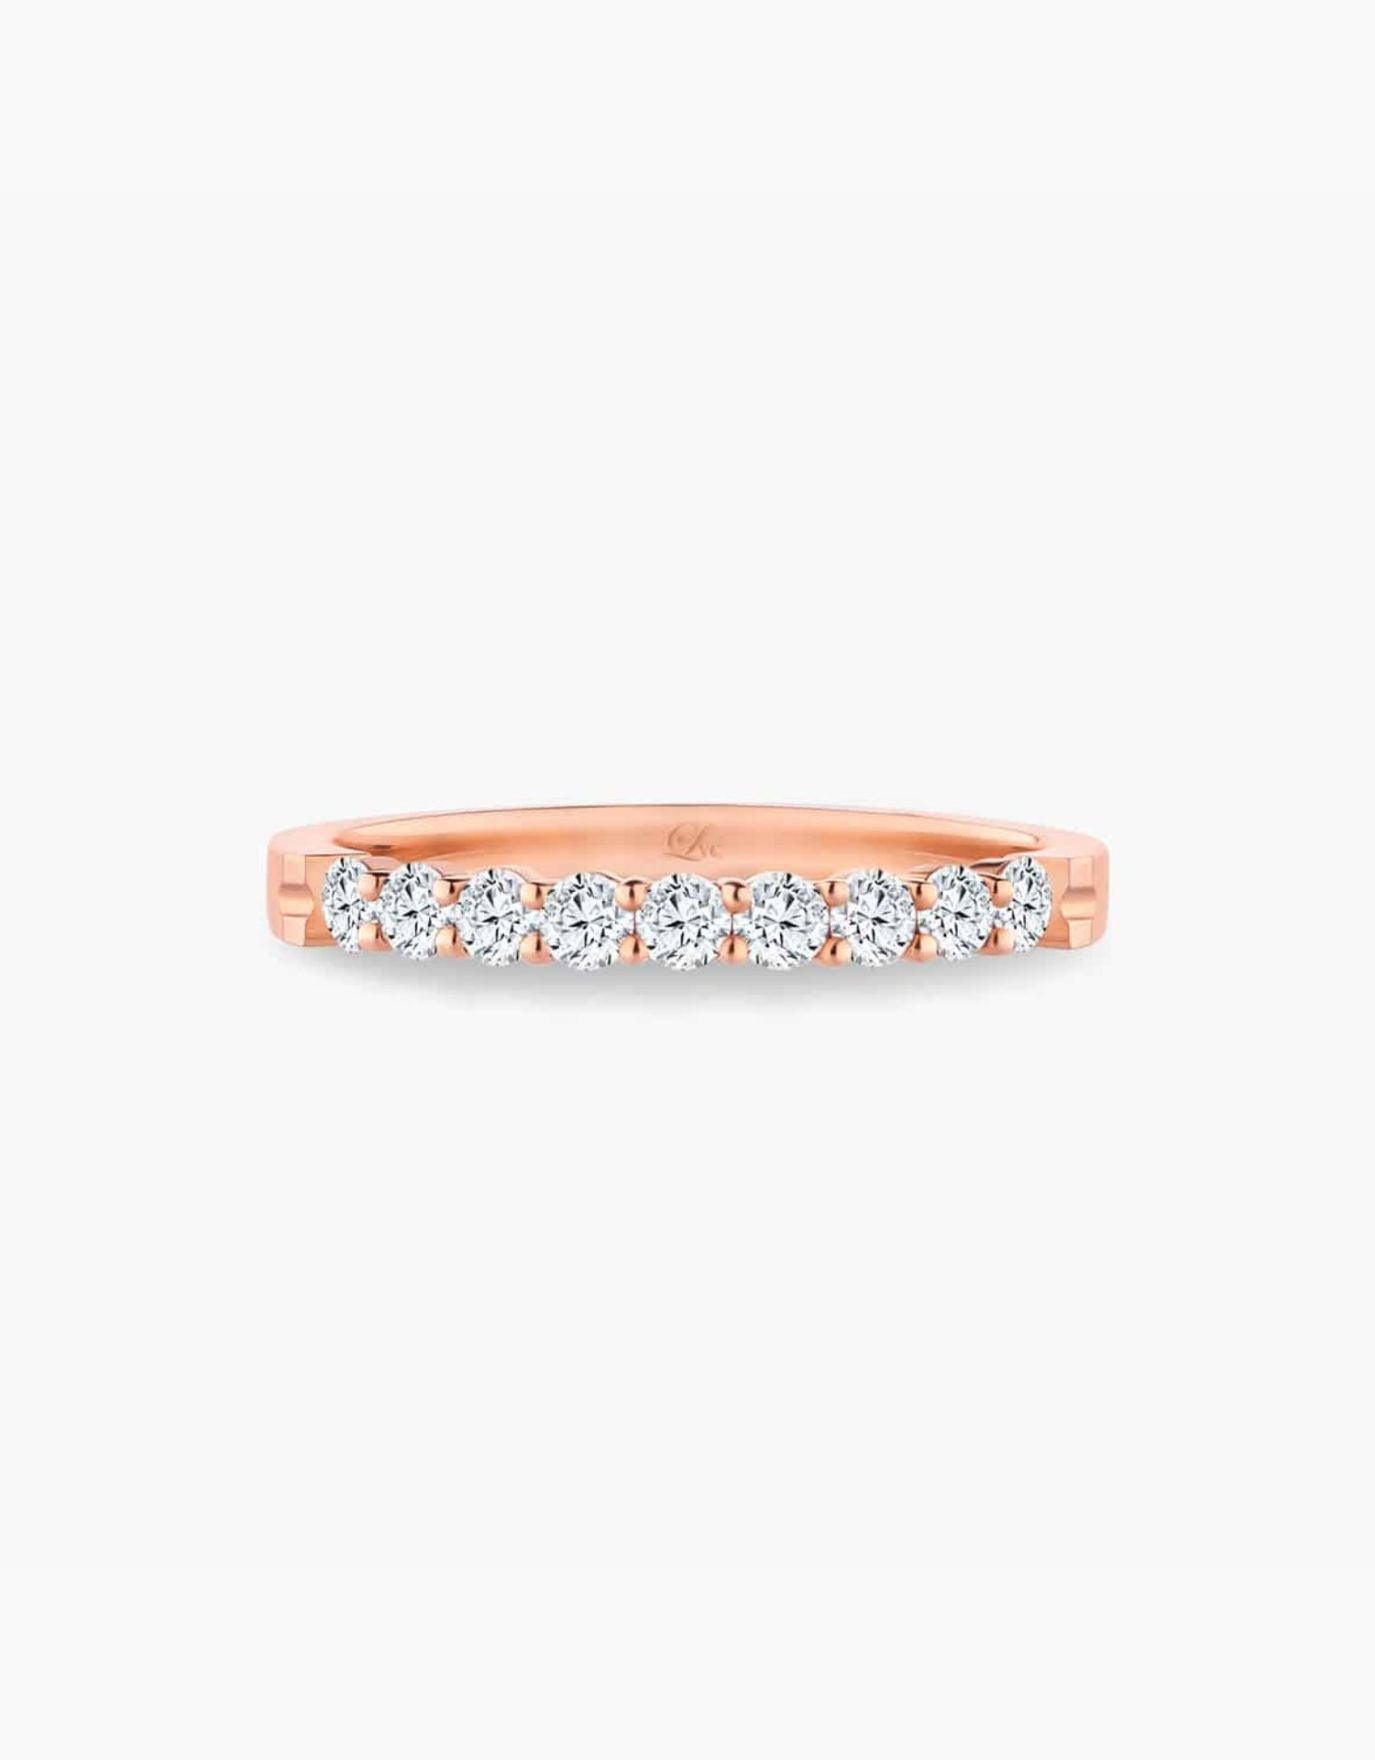 LVC Eterno Harmony Wedding Band in Rose Gold with Diamonds